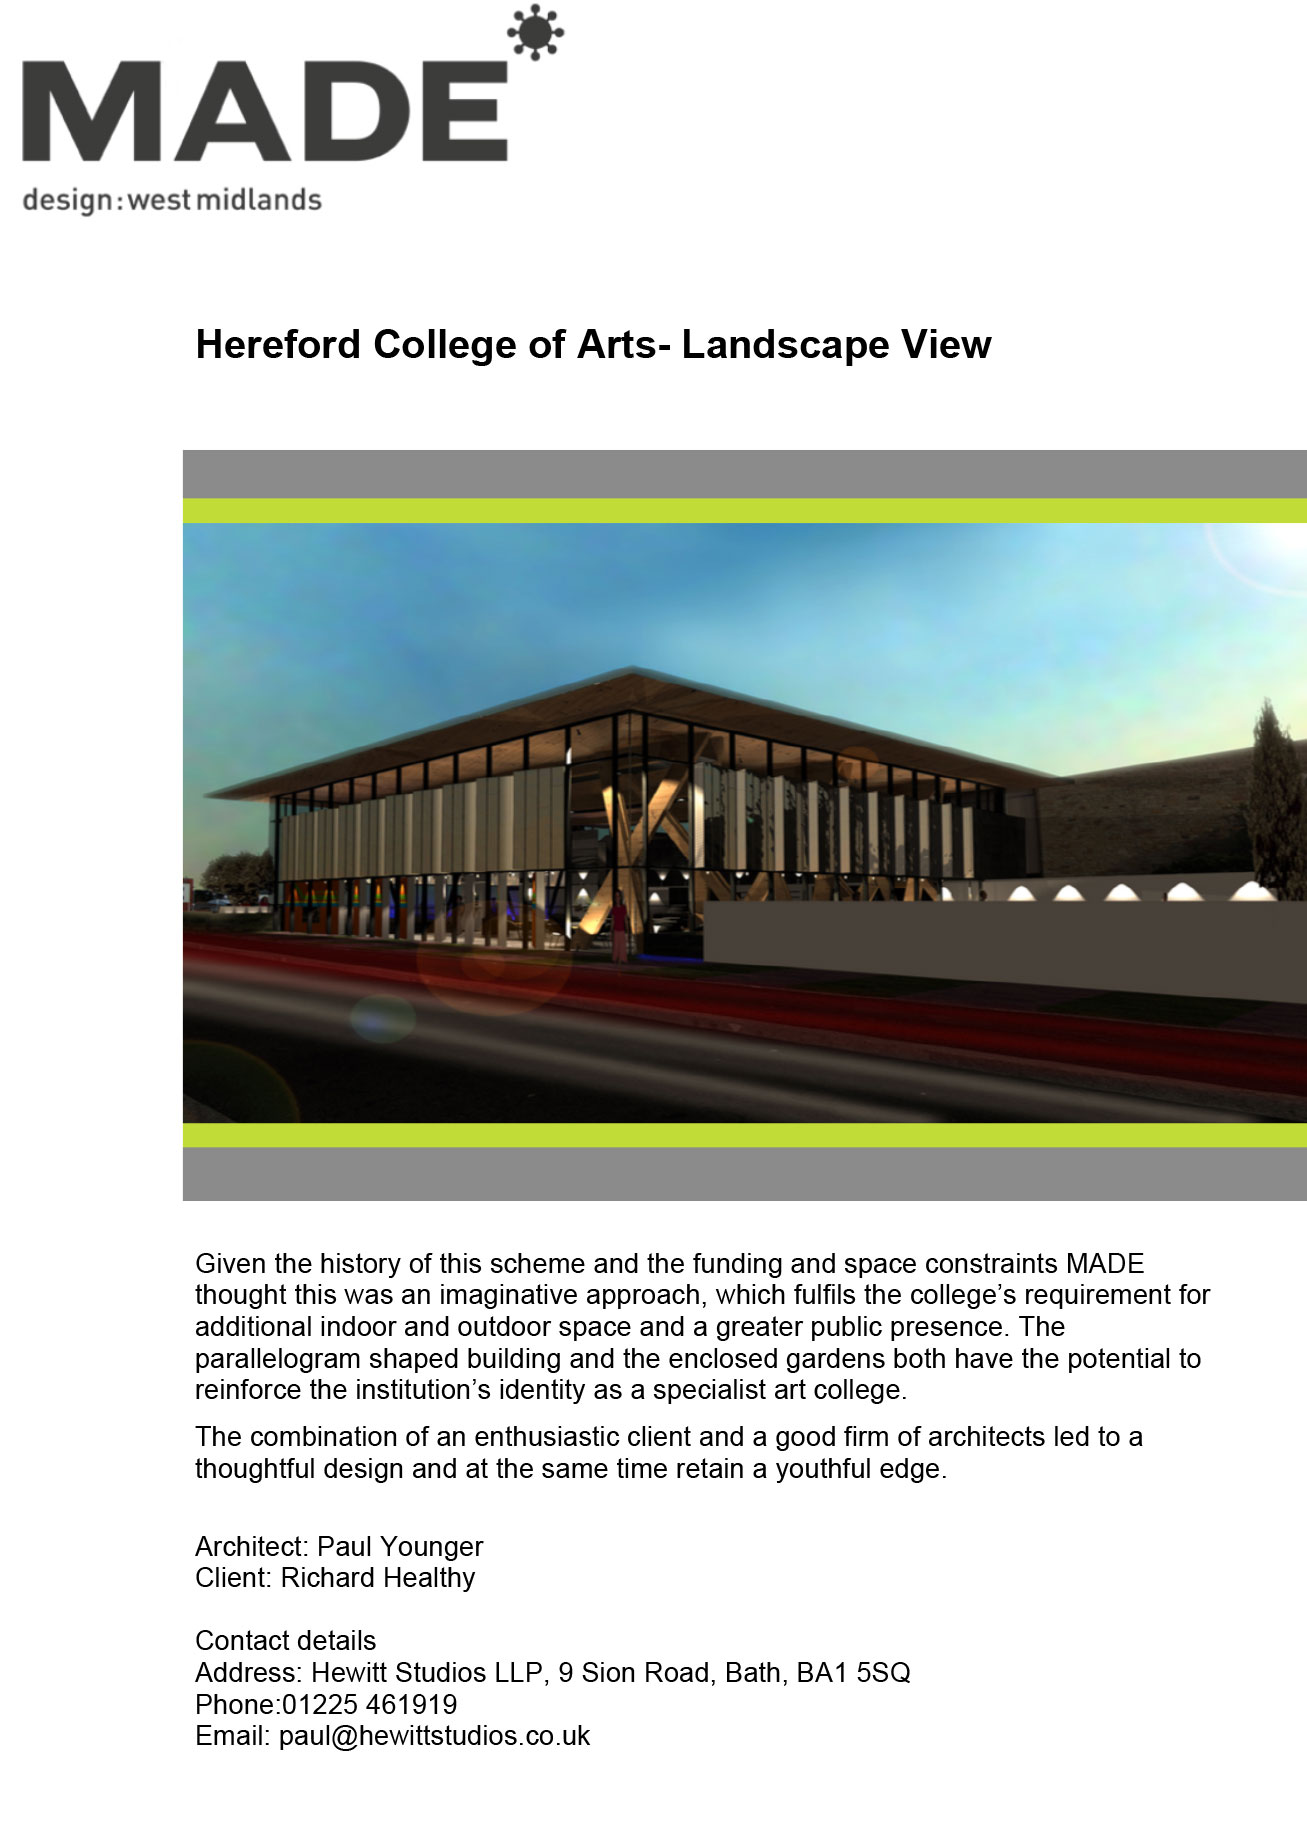 HCA Hub Hereford College of Arts MADE Design Review Feedback